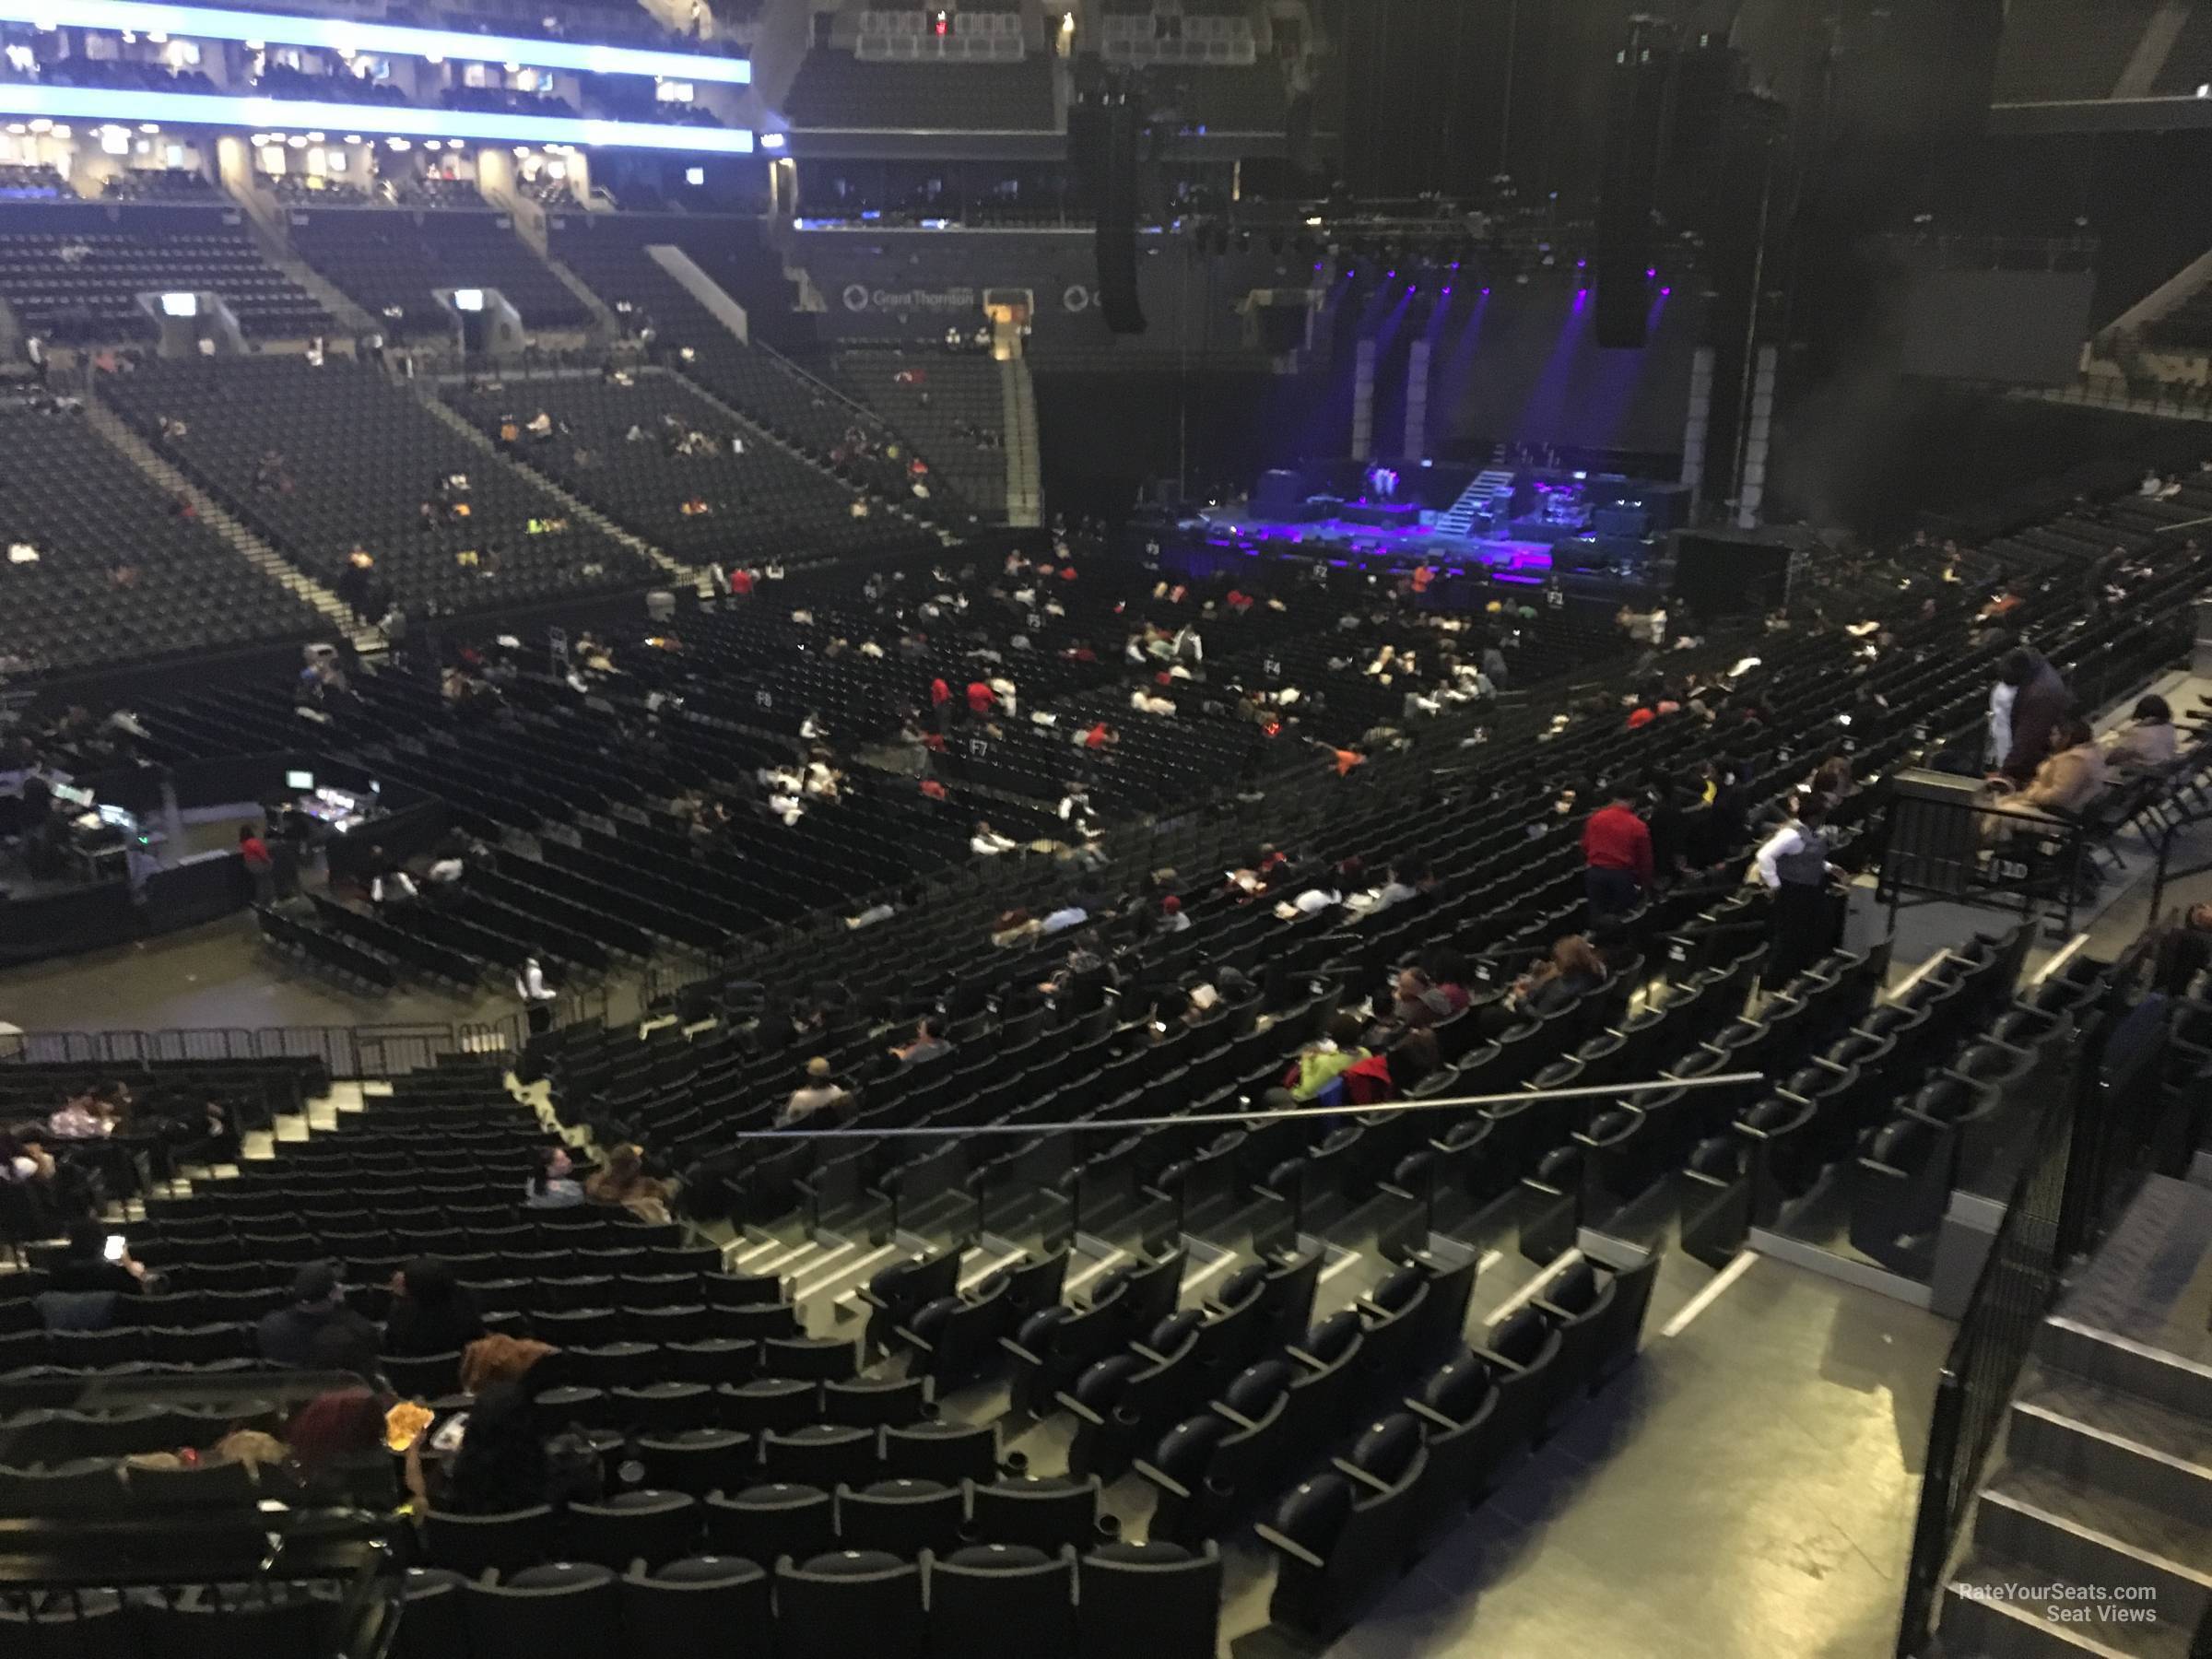 section 111, row 6 seat view  for concert - barclays center